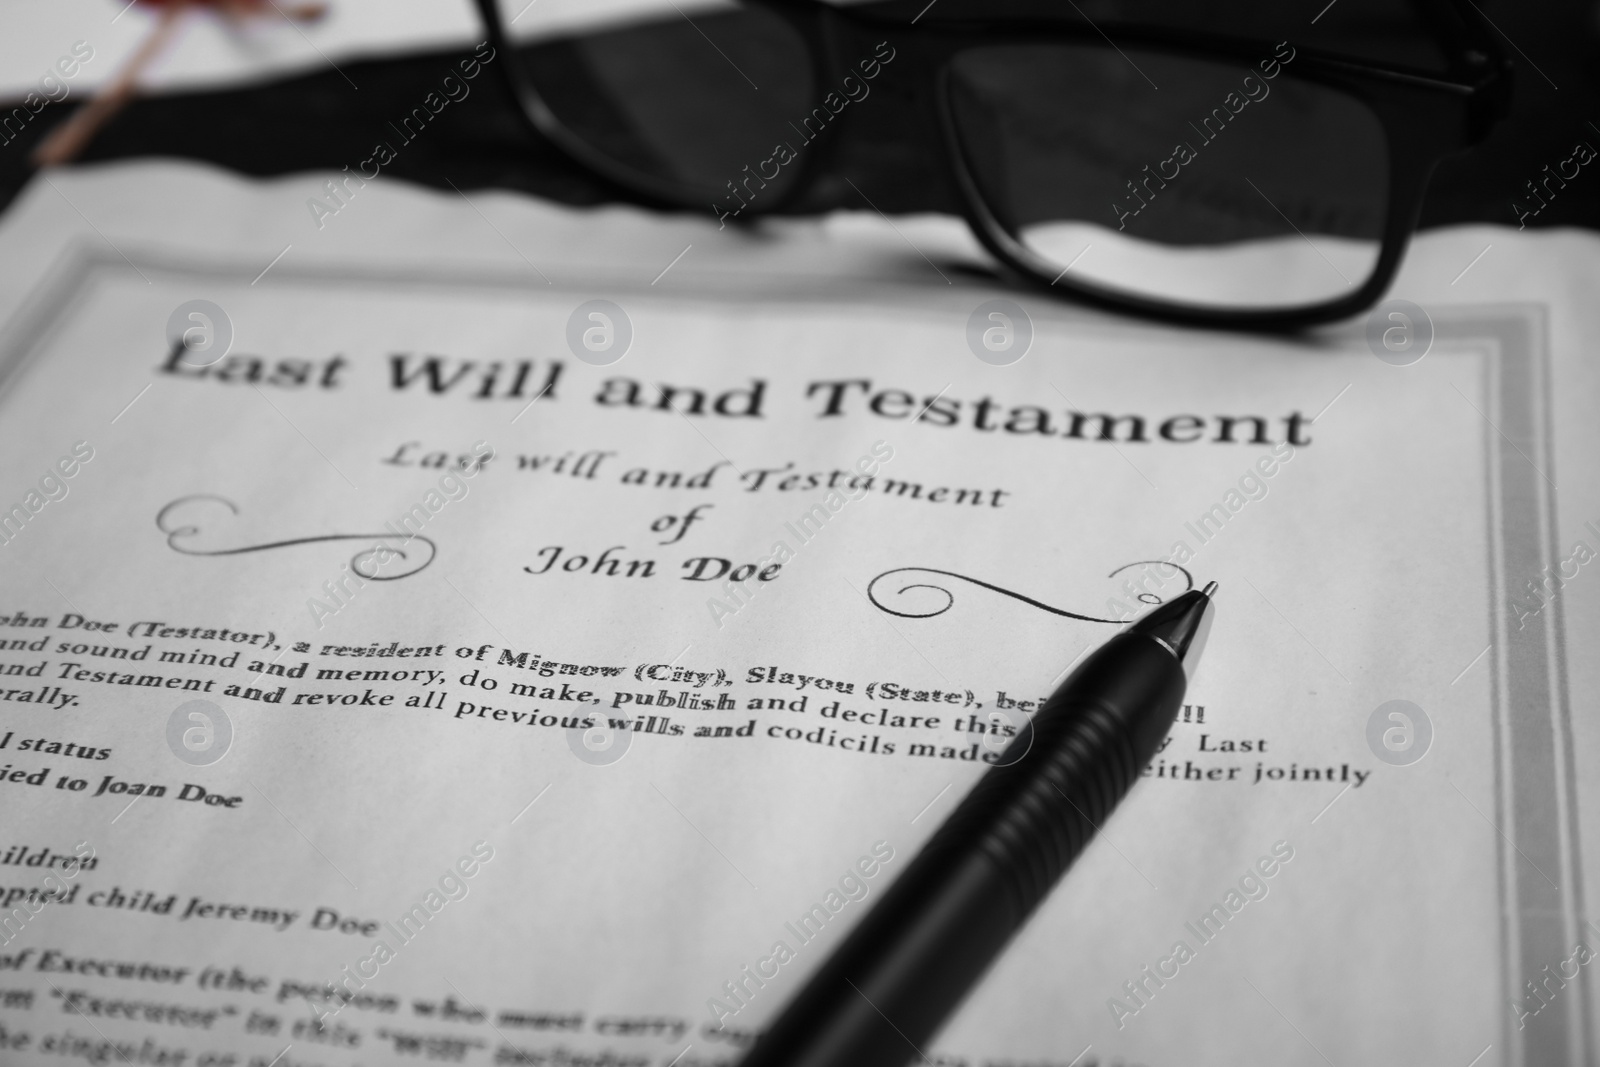 Photo of Last will and testament near pen, glasses on table, closeup